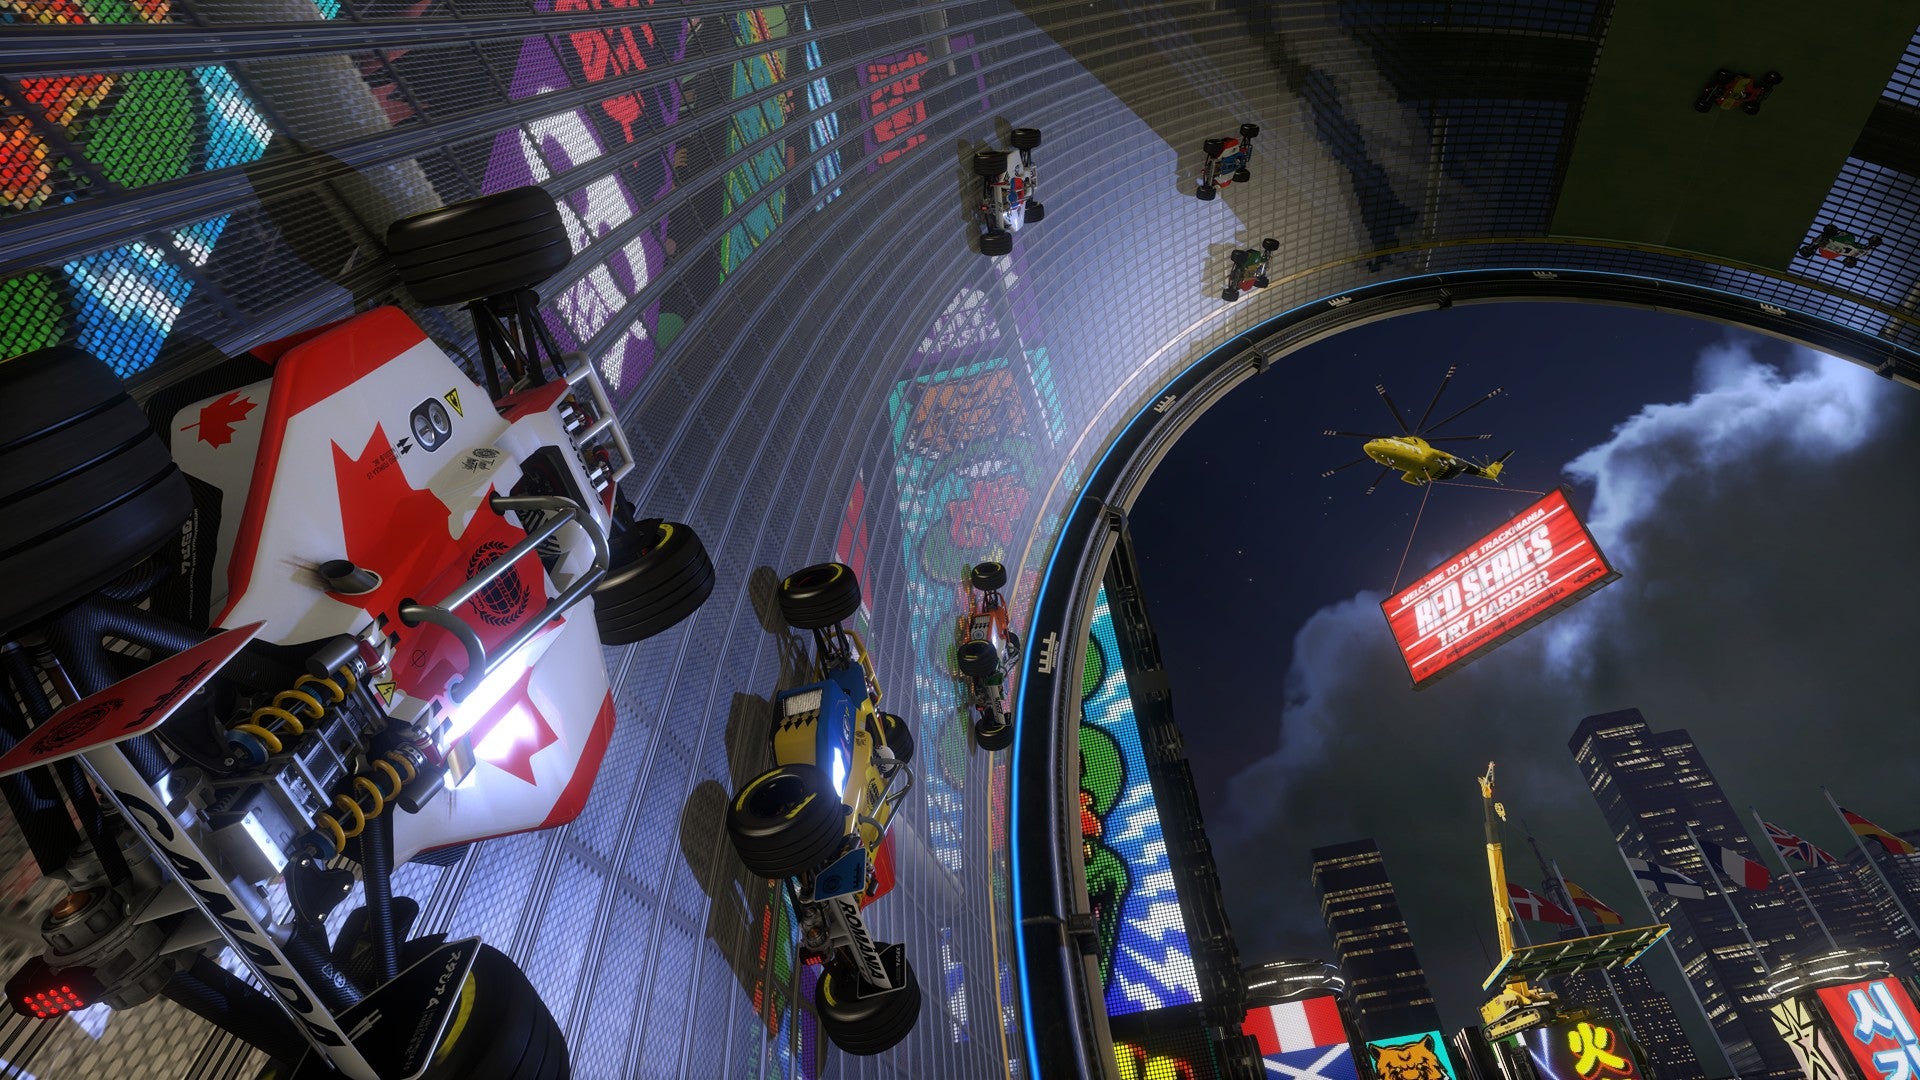 Trackmania Turbo PS4 Review: Pure Arcade Racing | VG247